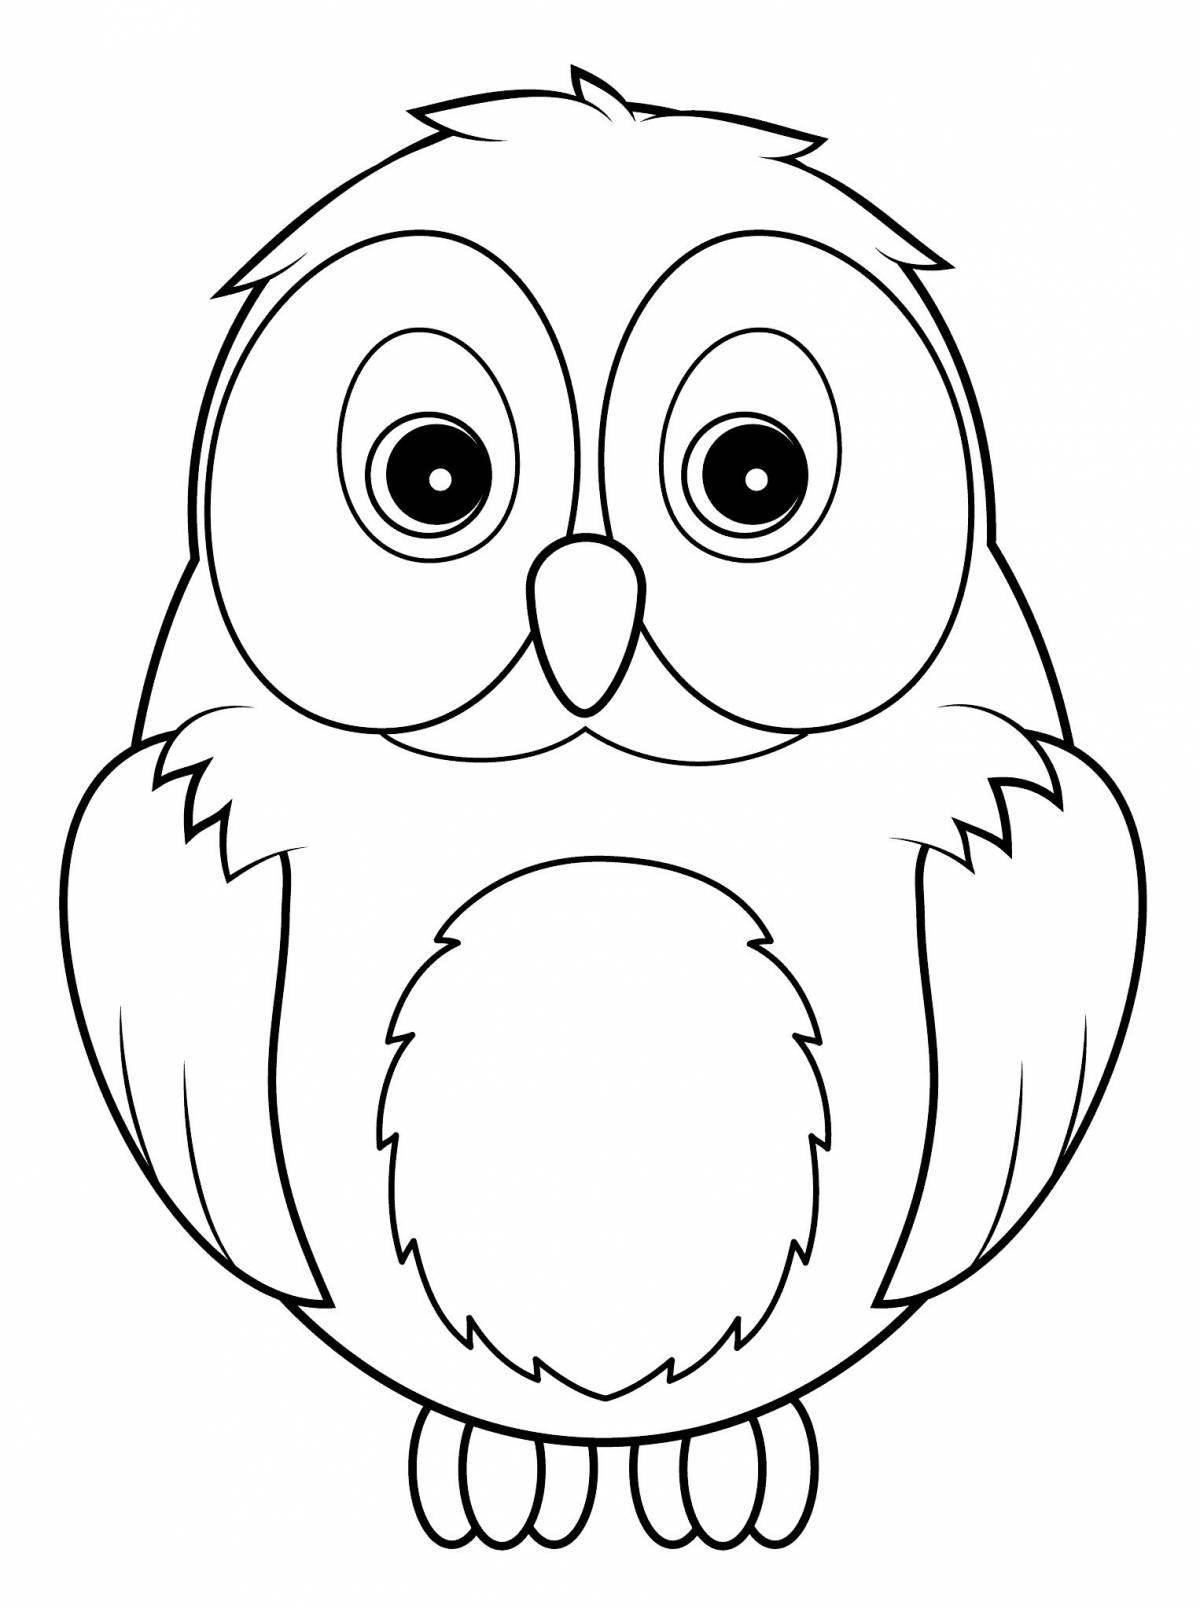 Living owlet coloring page